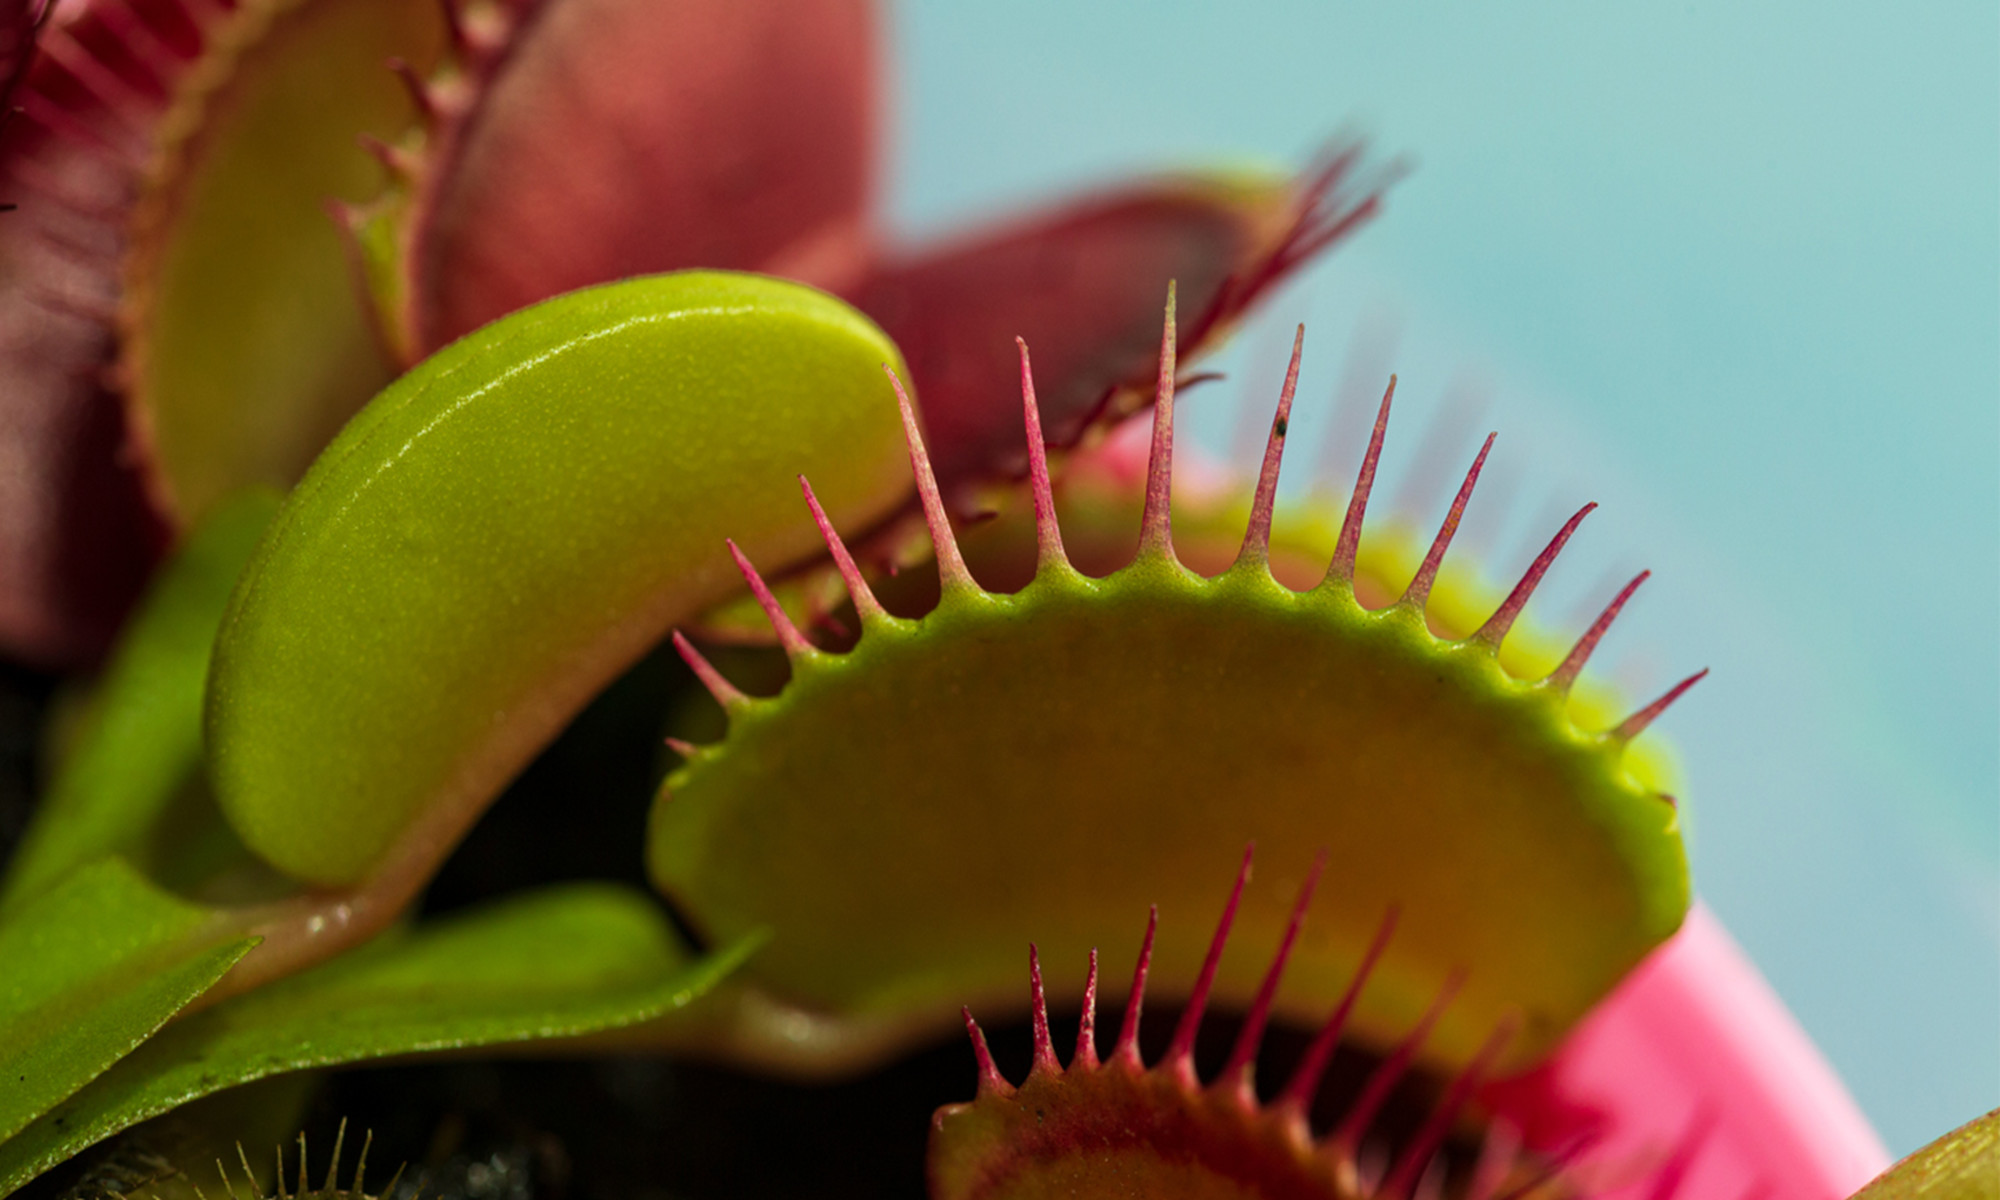 How to Properly Care for a Venus Flytrap